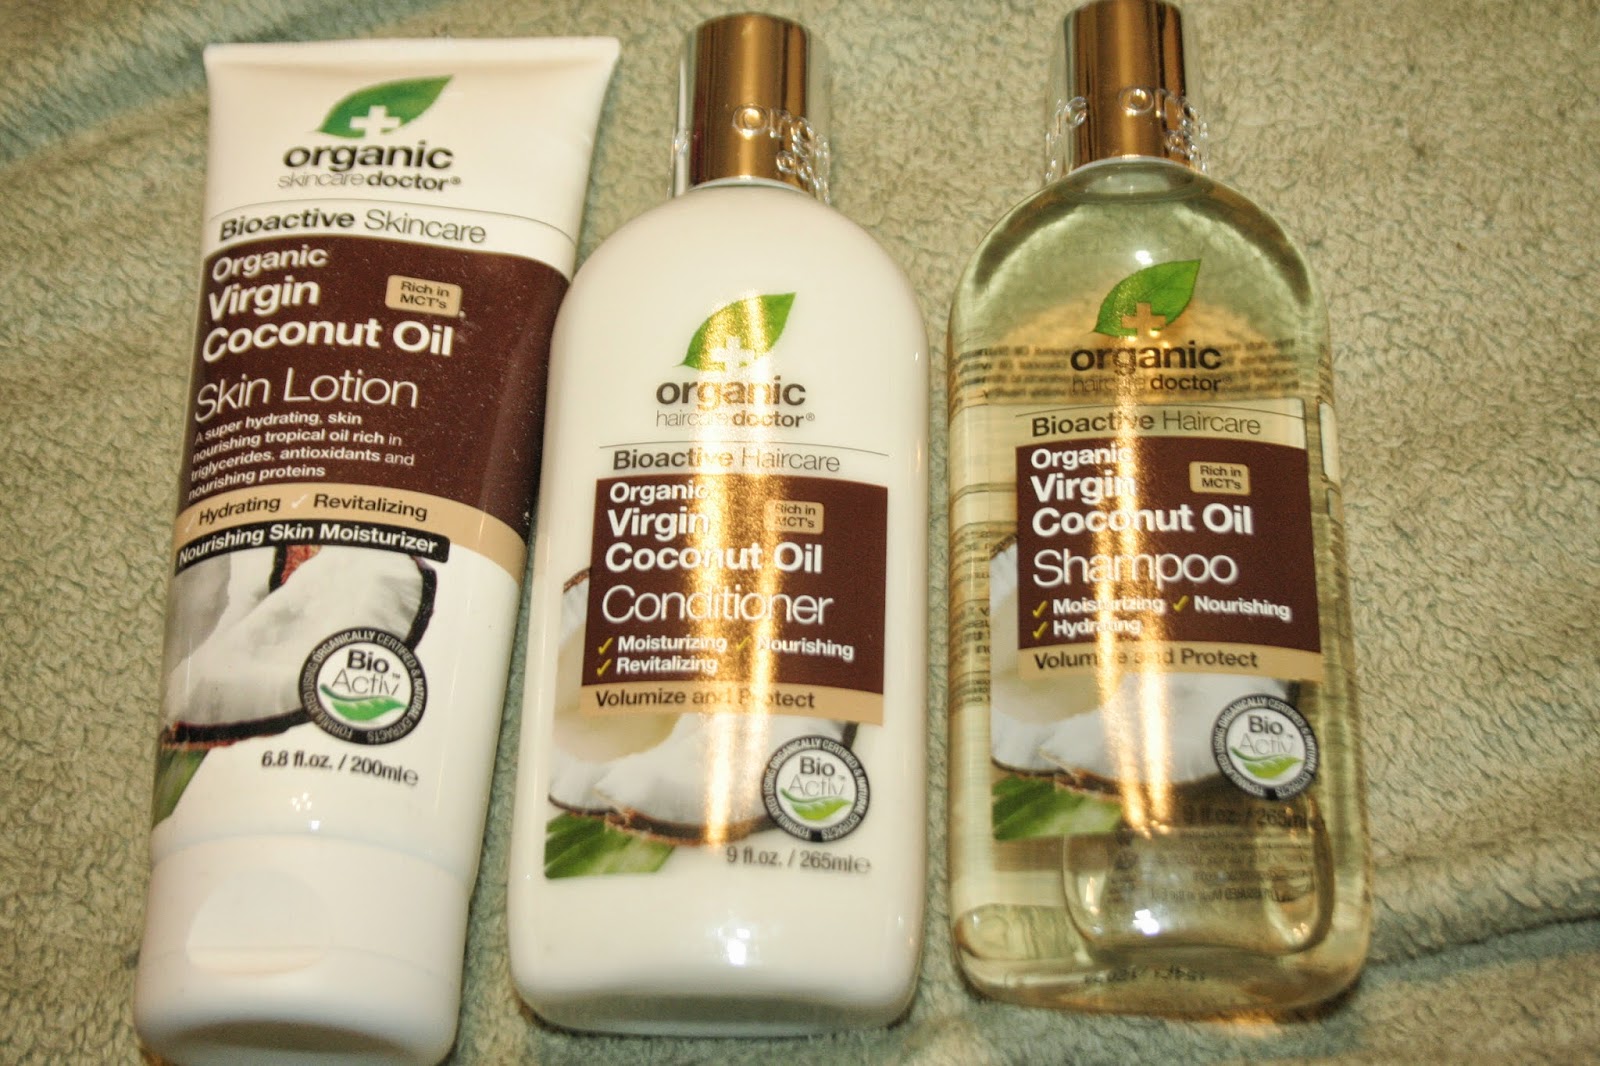 tand butik Kong Lear 7 Kids and Us: Organic Doctor Virgin Coconut Oil Shampoo, Conditioner and  Skin Lotion